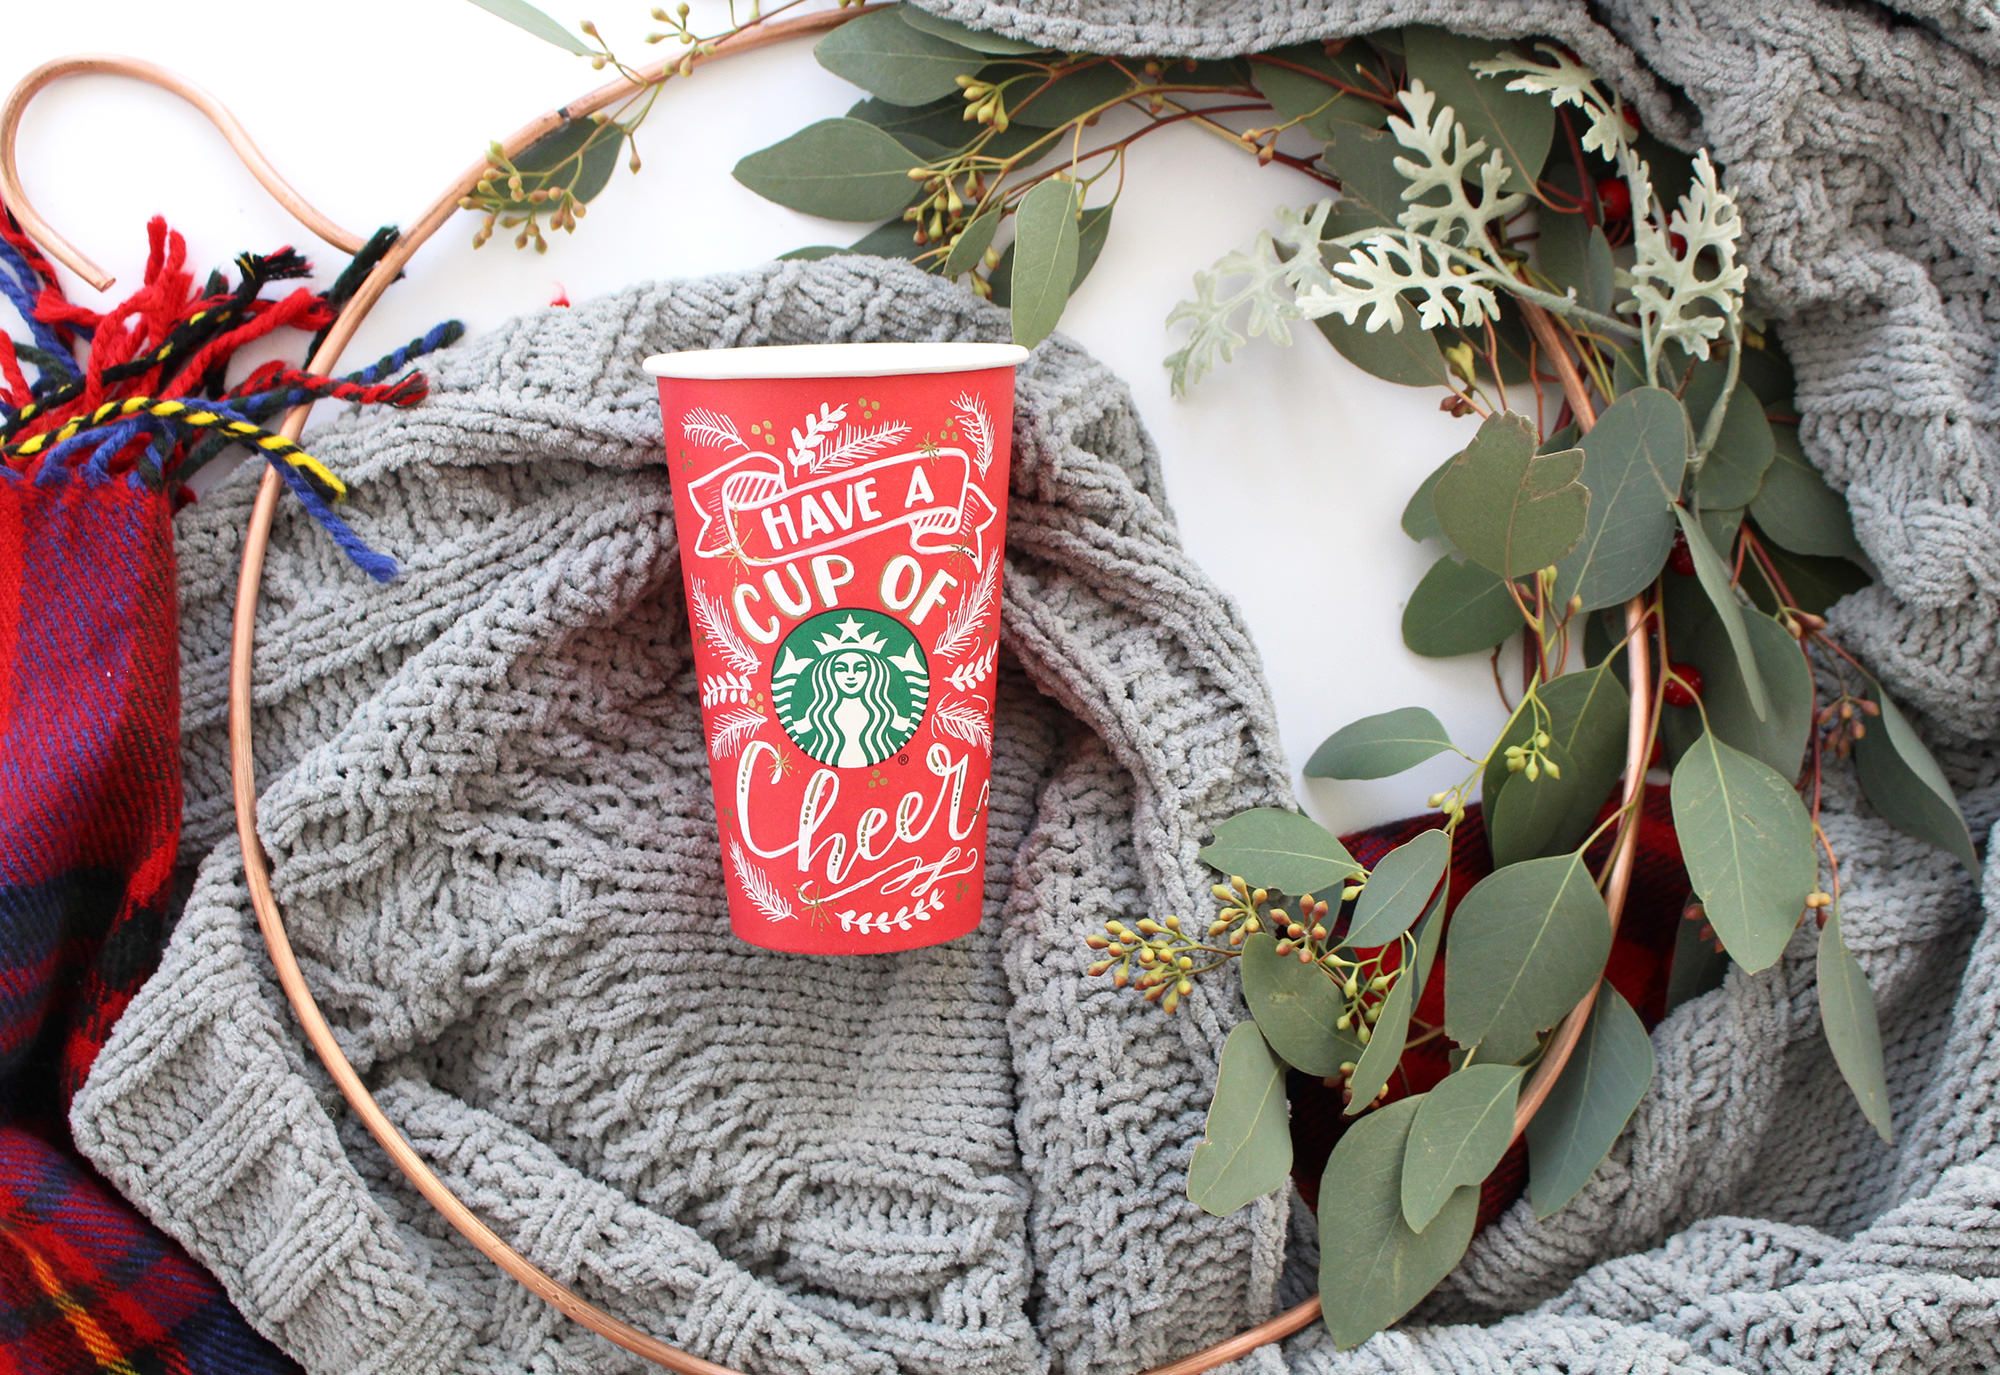 Starbucks Red Cup Art by Valerie McKeehan of Lily & Val. Have a cup of cheer!